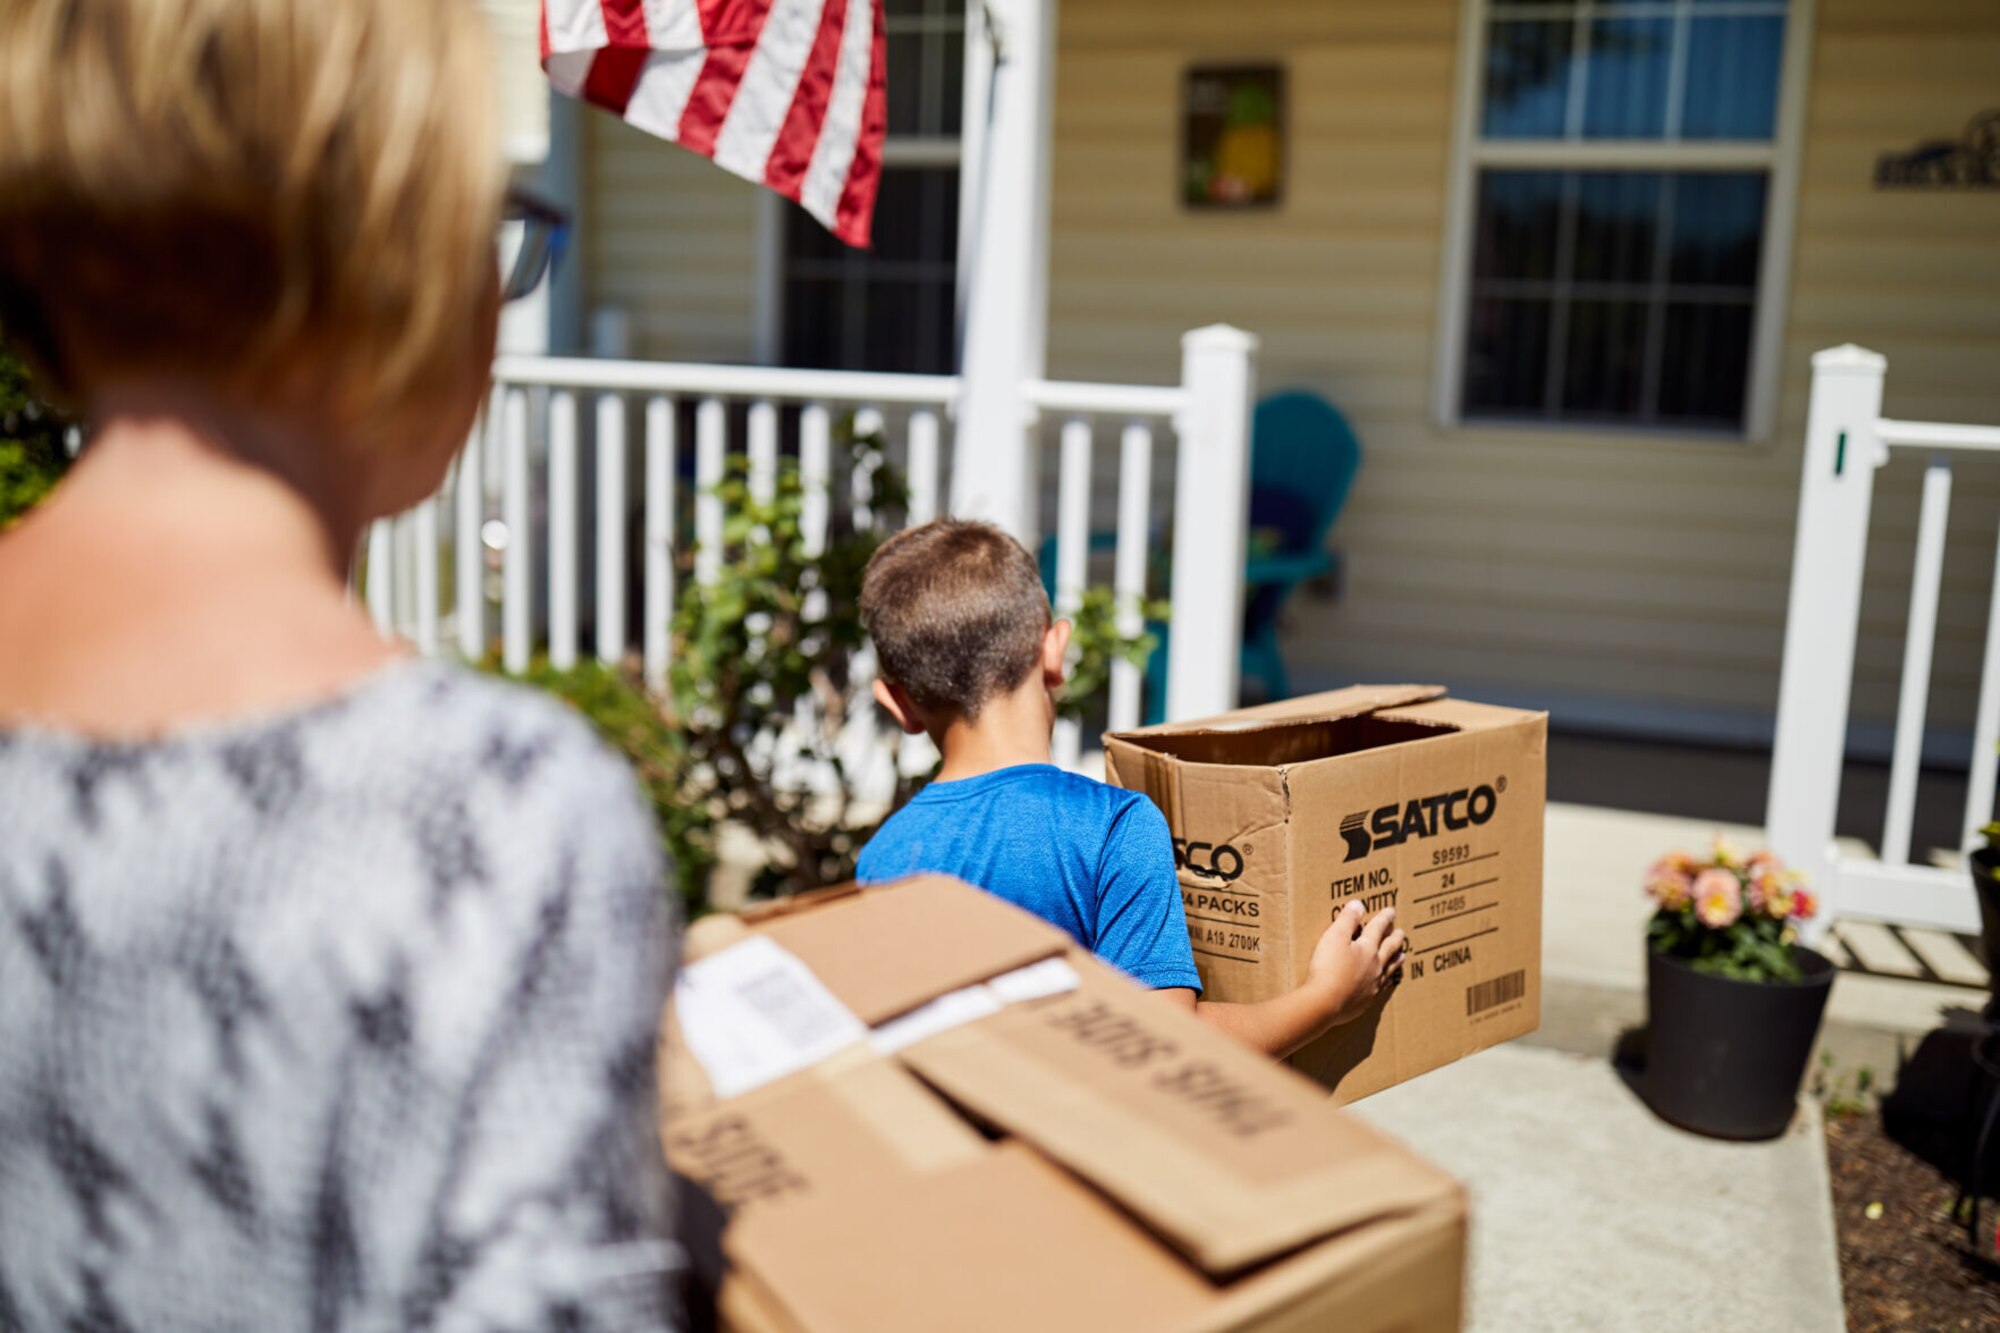 Woman and child carry moving boxes while walking into a house.